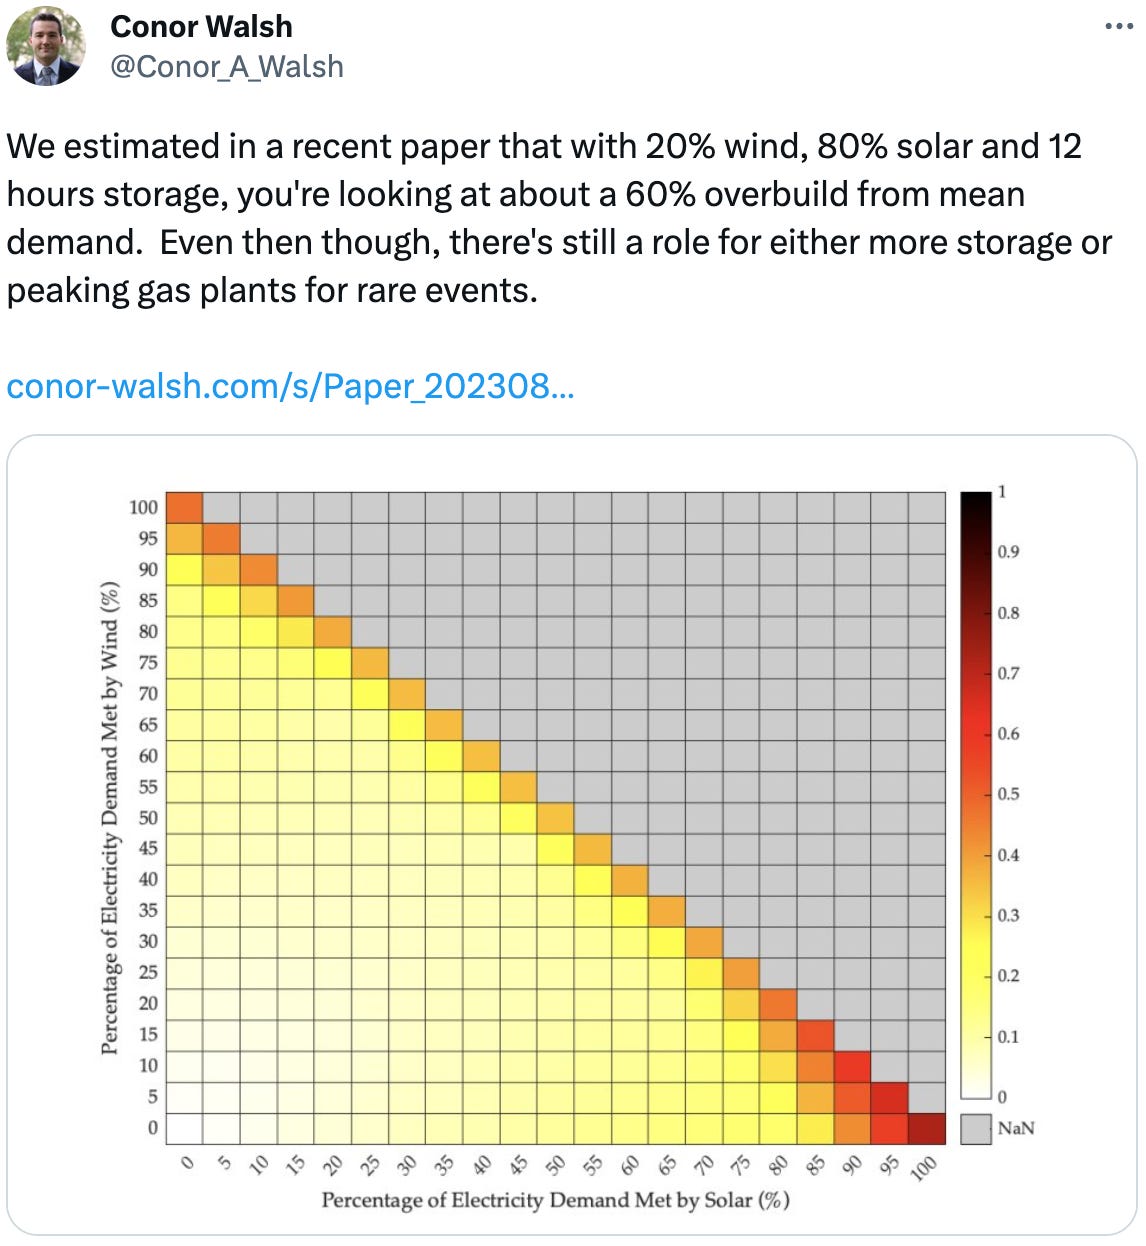  See new Tweets Conversation Noah Smith 🐇🇺🇸🇺🇦 @Noahpinion · 12h Seasonal intermittency suggests that solar can handle winter just fine if we overbuild by a factor of maybe 1.7. Quote Joey Politano 🏳️‍🌈 @JosephPolitano · 13h New record high for US solar power generation! Output was up more than 20% from July 2022 and up nearly 125% from July 2019! Noah Smith 🐇🇺🇸🇺🇦 @Noahpinion · 12h Seems like if we overbuild by 70% and have batteries for nighttime, solar's intermittency is pretty much a solved problem.  @JesseJenkins  would you say that sounds roughly right? Conor Walsh @Conor_A_Walsh We estimated in a recent paper that with 20% wind, 80% solar and 12 hours storage, you're looking at about a 60% overbuild from mean demand.  Even then though, there's still a role for either more storage or peaking gas plants for rare events.   https://conor-walsh.com/s/Paper_20230816.pdf